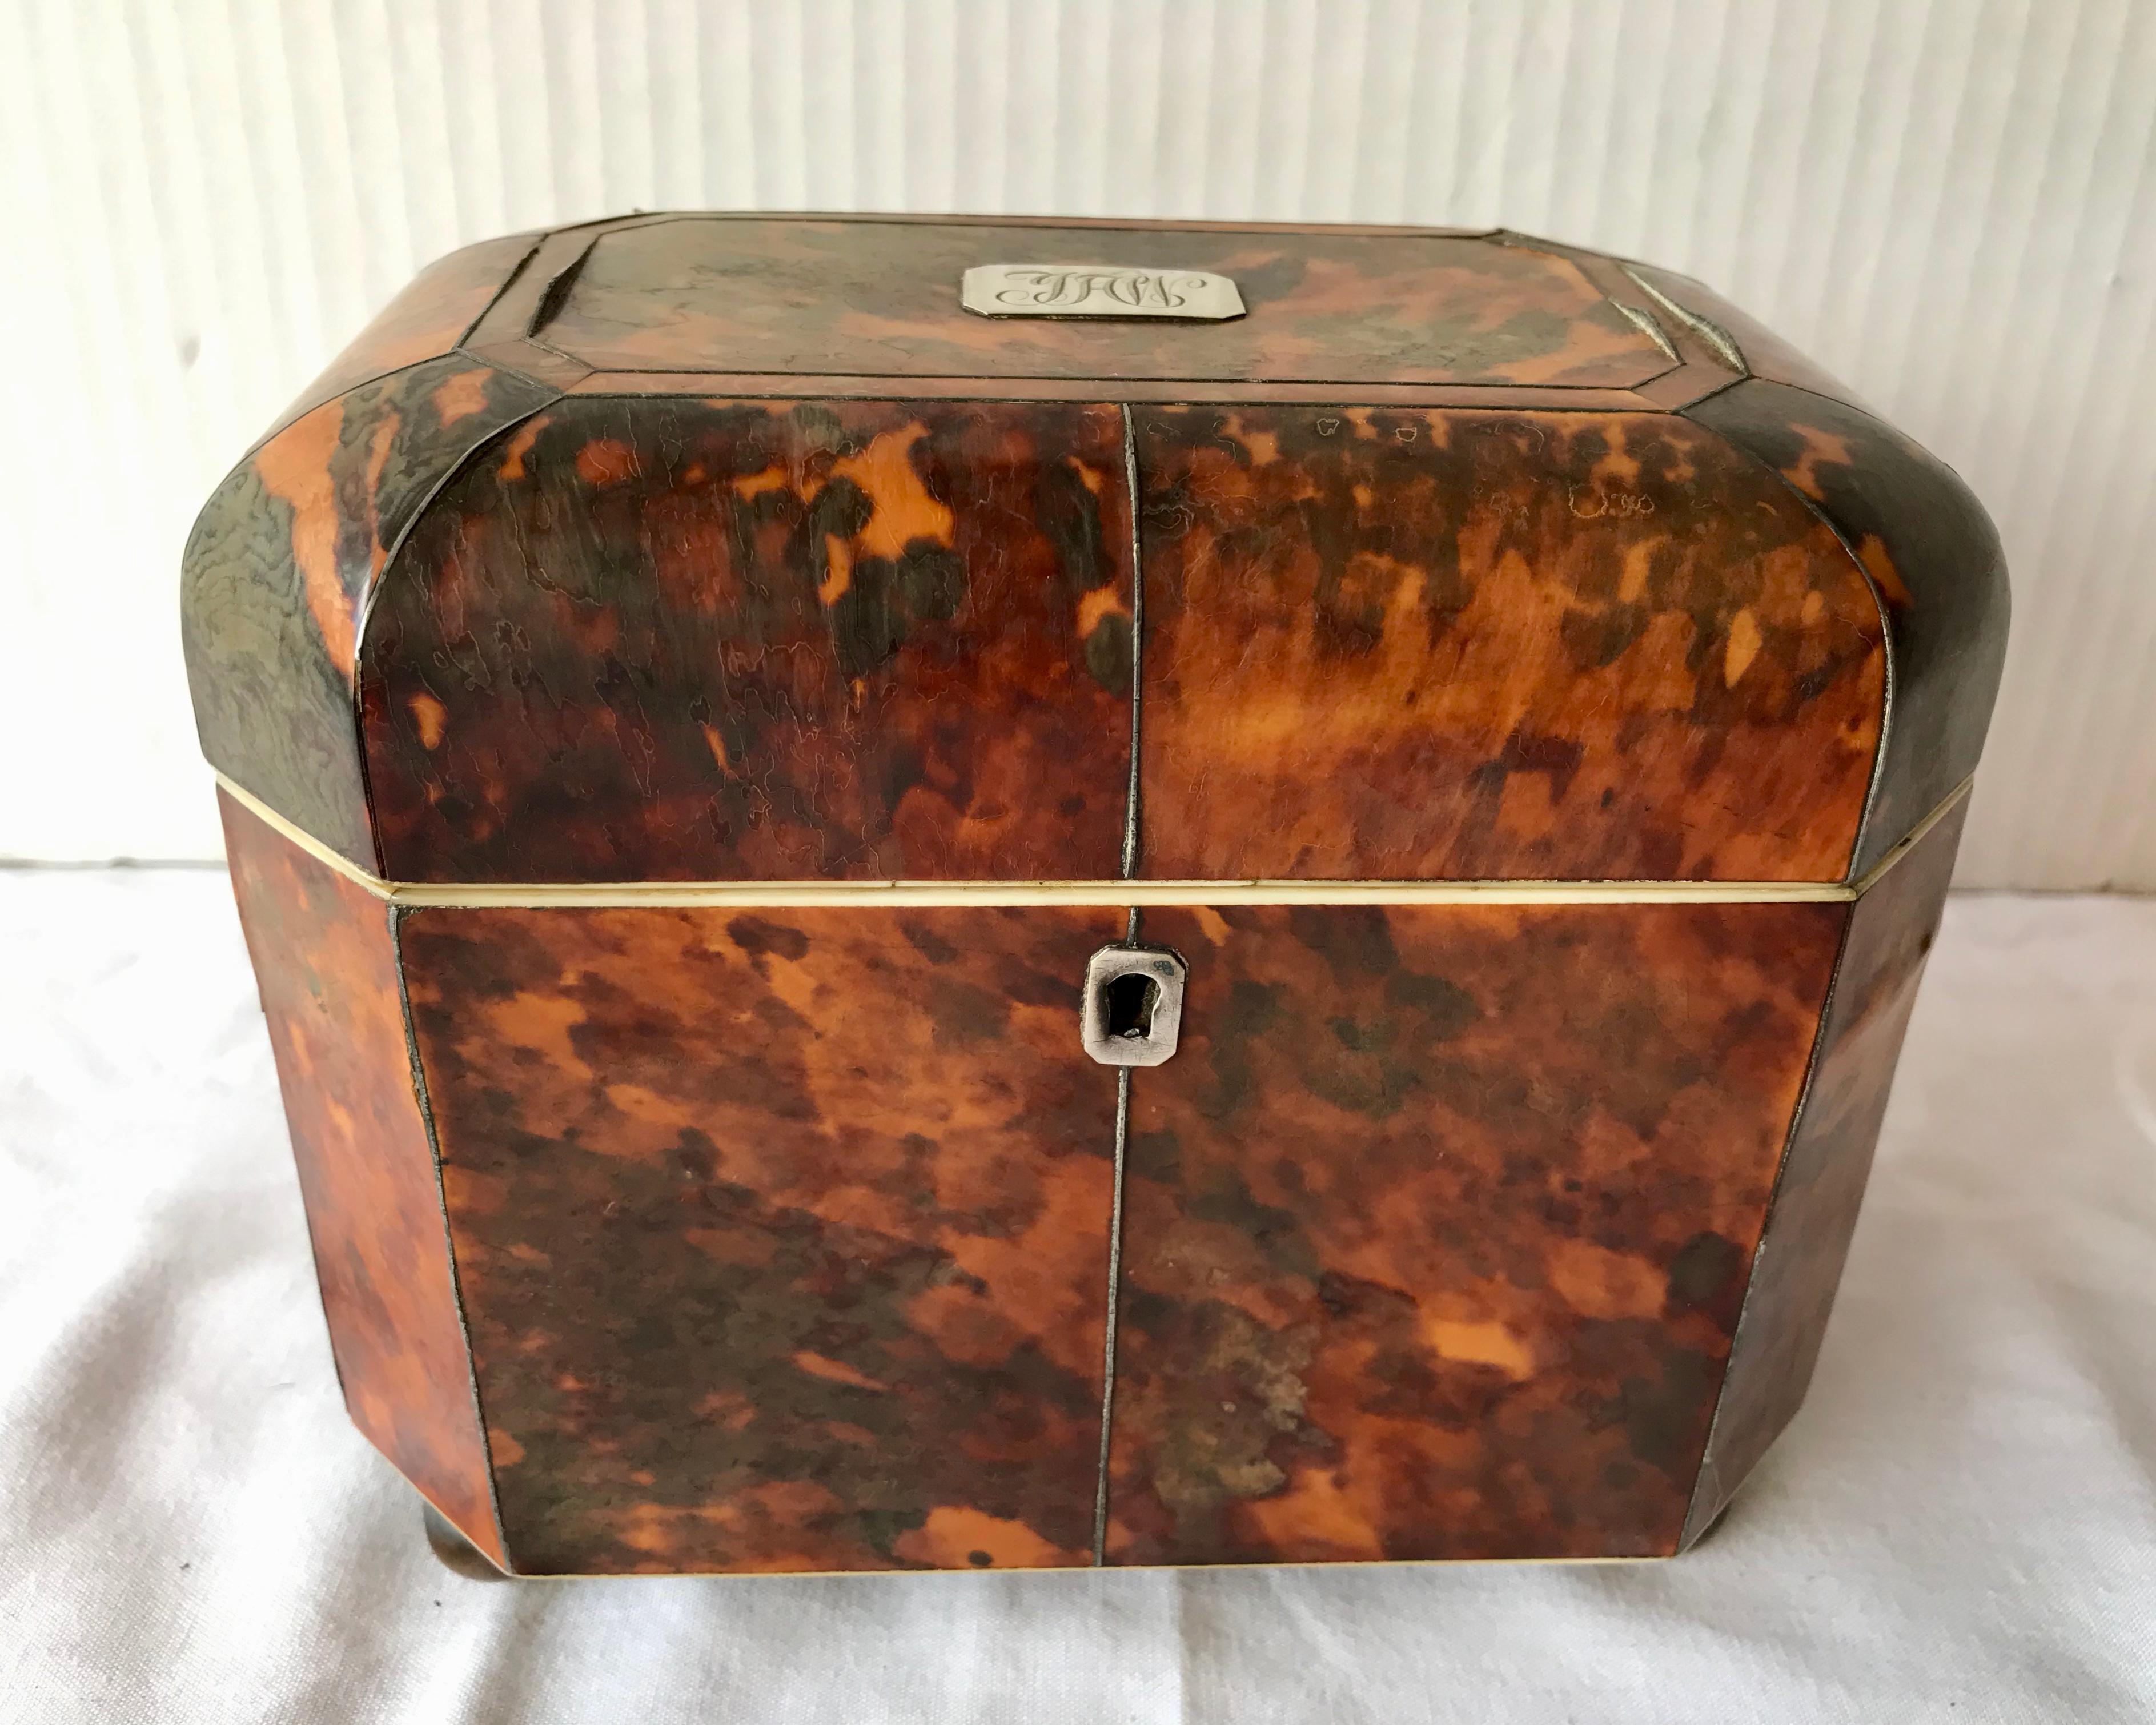 A desirable dome form. The caddy is 8 sided. This is a fine period tea caddy. Matte finish.